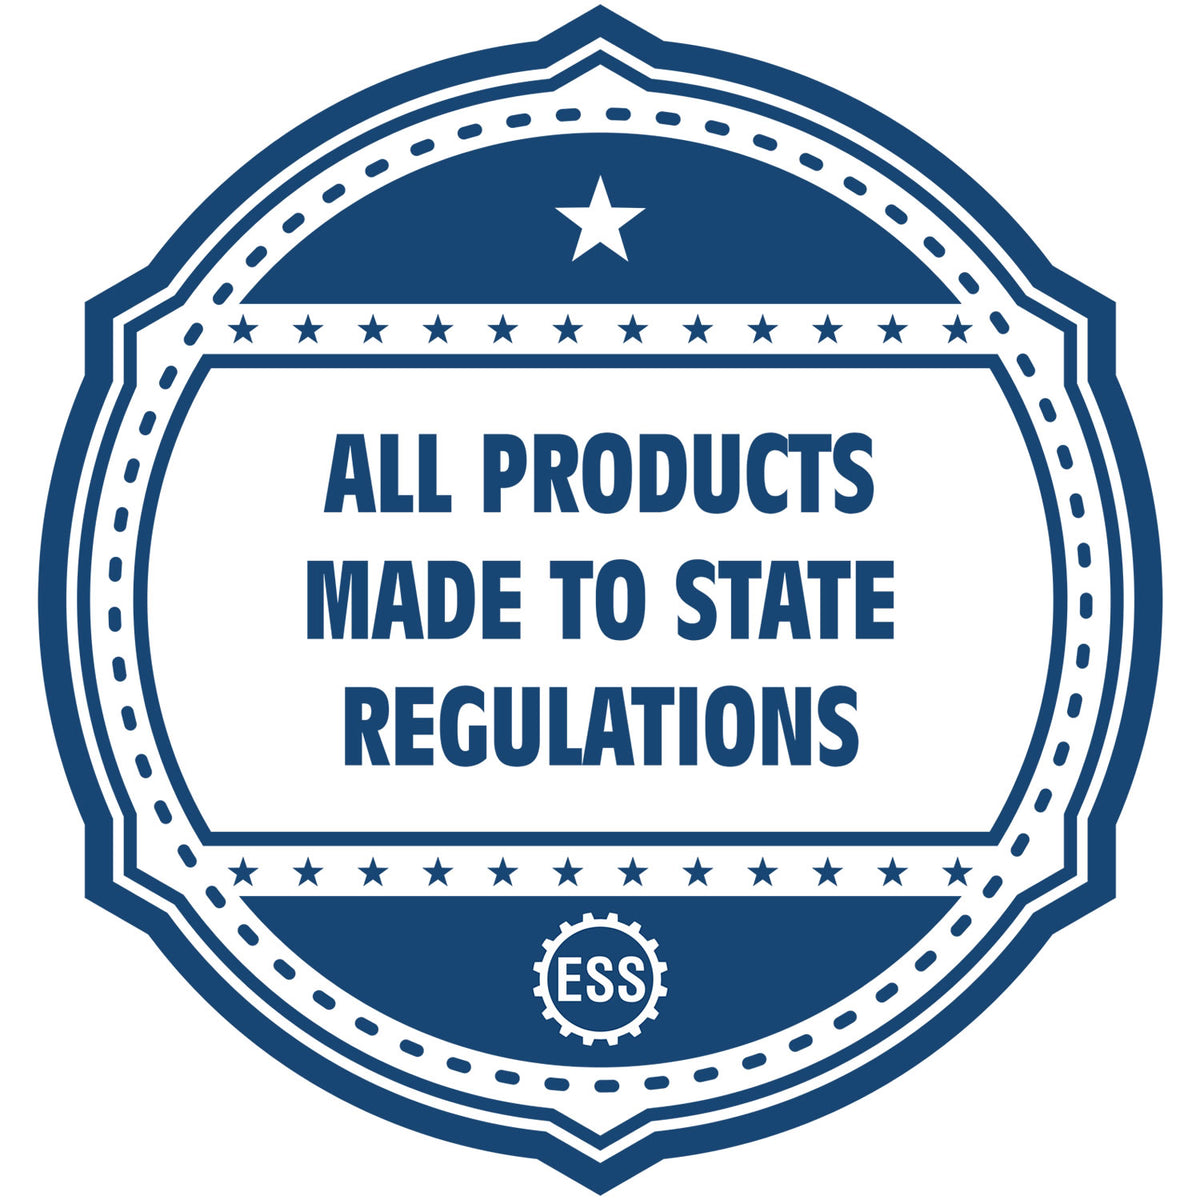 An icon or badge element for the Premium MaxLight Pre-Inked Tennessee Landscape Architectural Stamp showing that this product is made in compliance with state regulations.